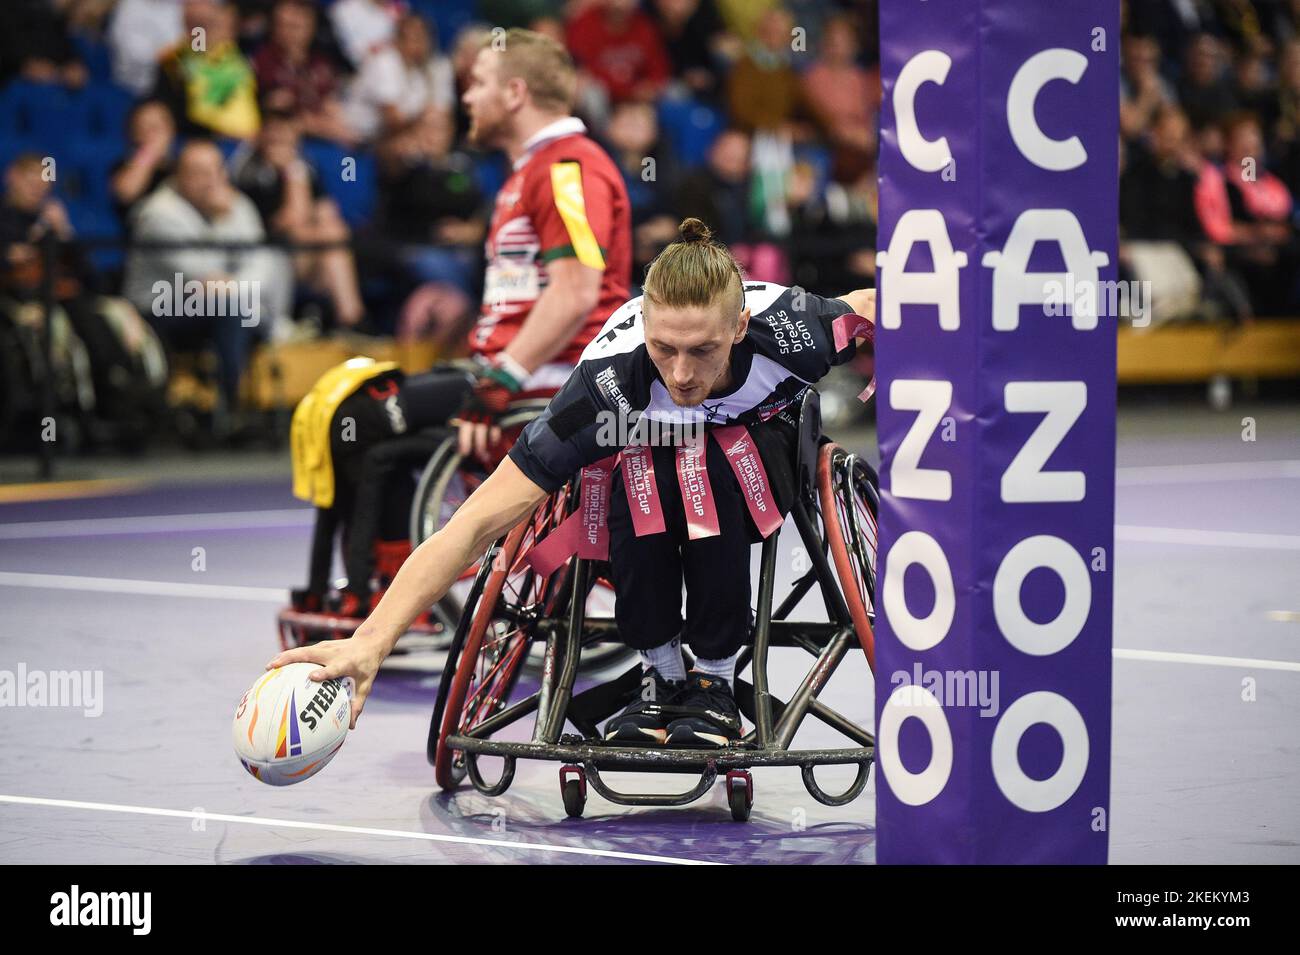 Australia defeat USA to win 2022 Wheelchair Rugby World Championship